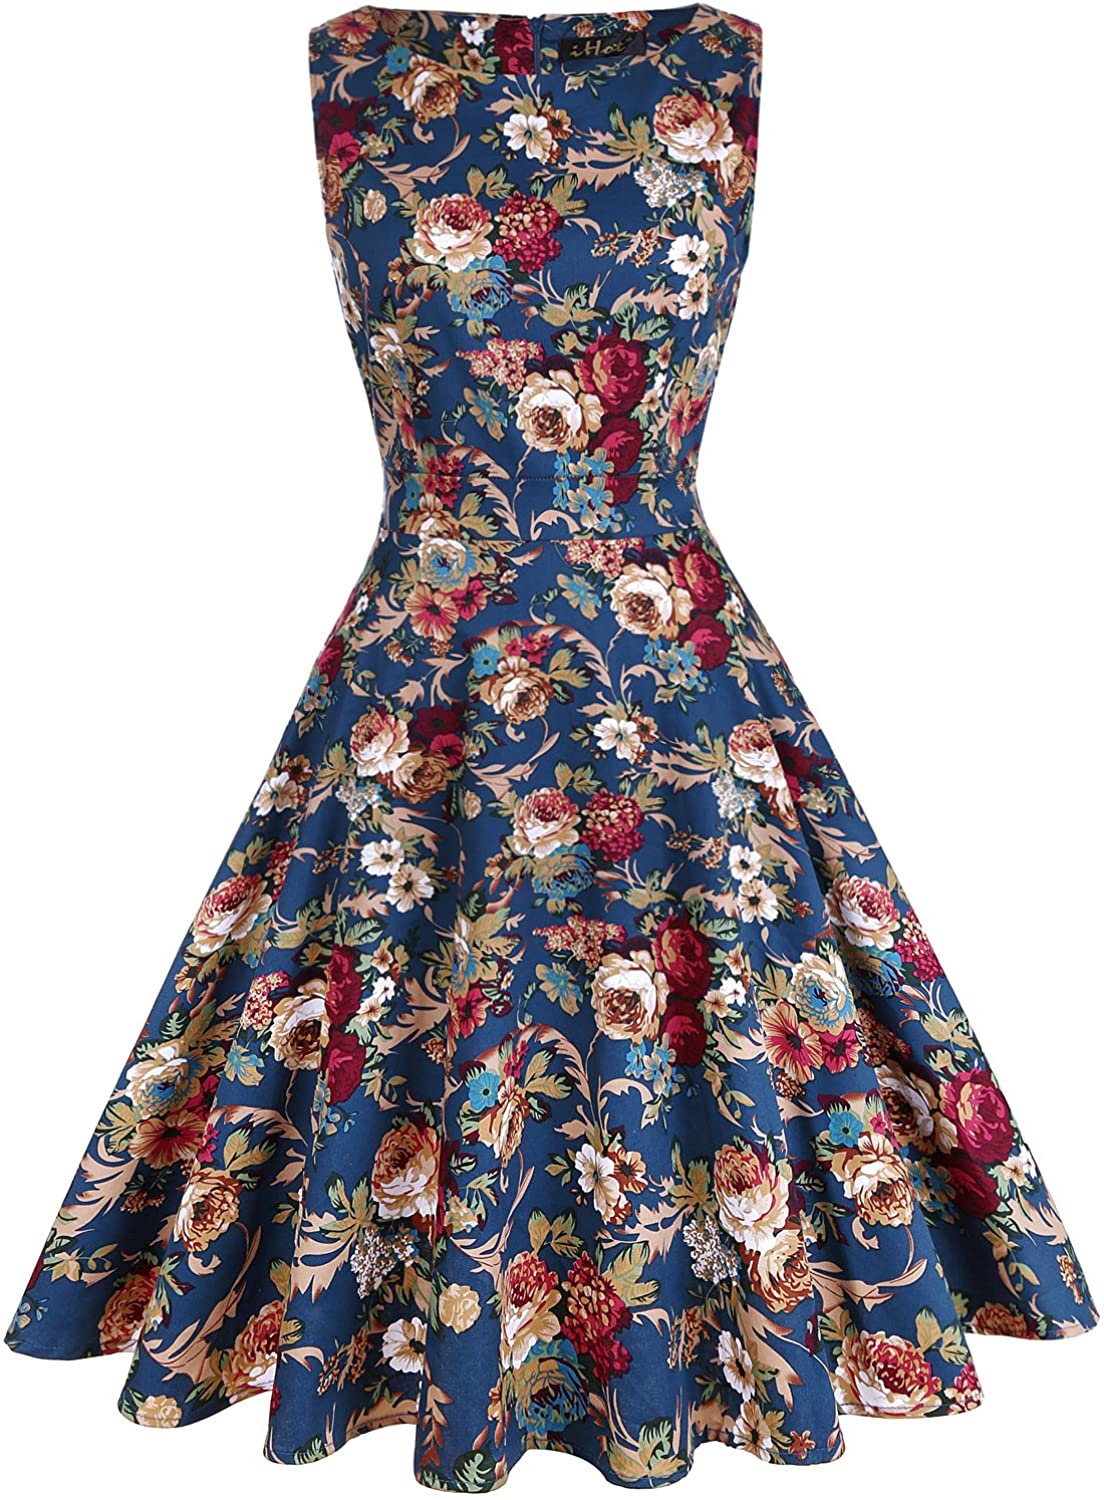 IHOT Vintage Tea Dress 1950's Floral Spring Garden Retro Swing Prom Party Cocktail Party Dress for Women 